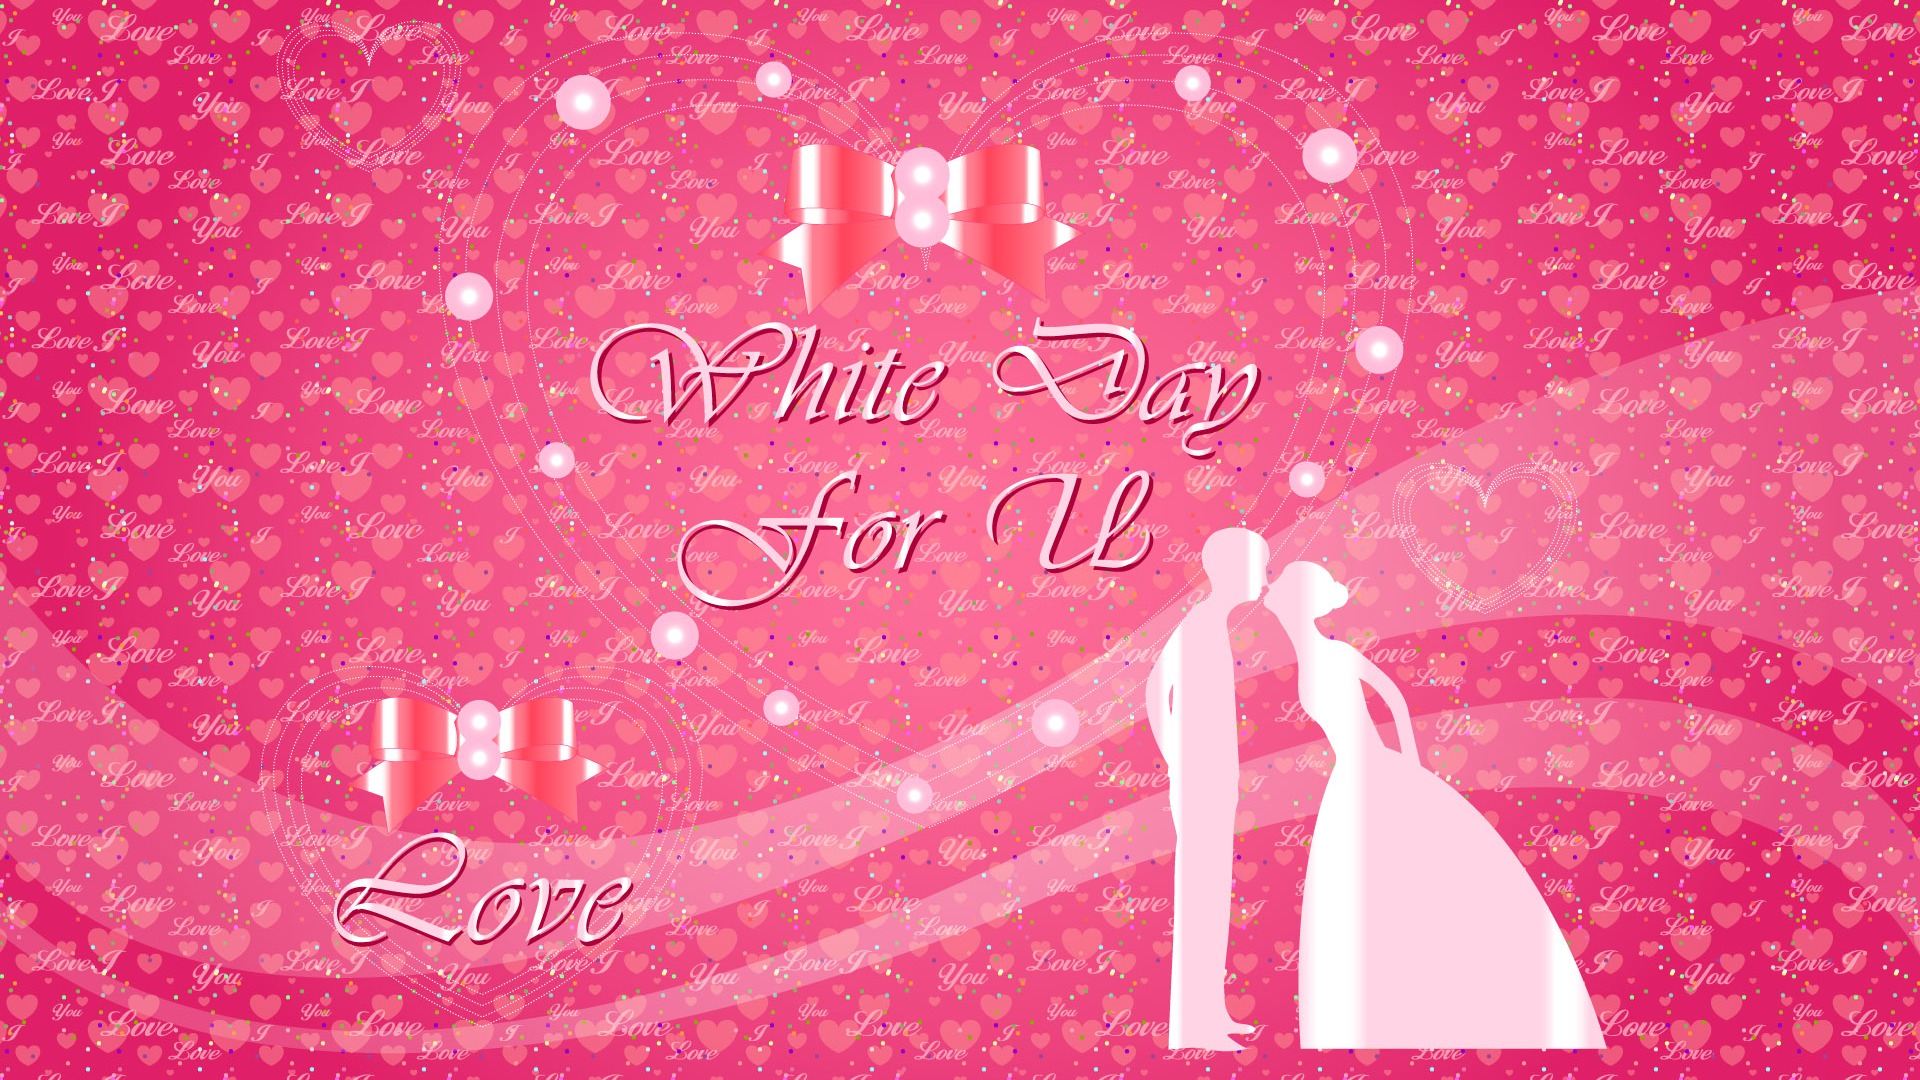 Valentine's Day Theme Wallpapers (1) #12 - 1920x1080